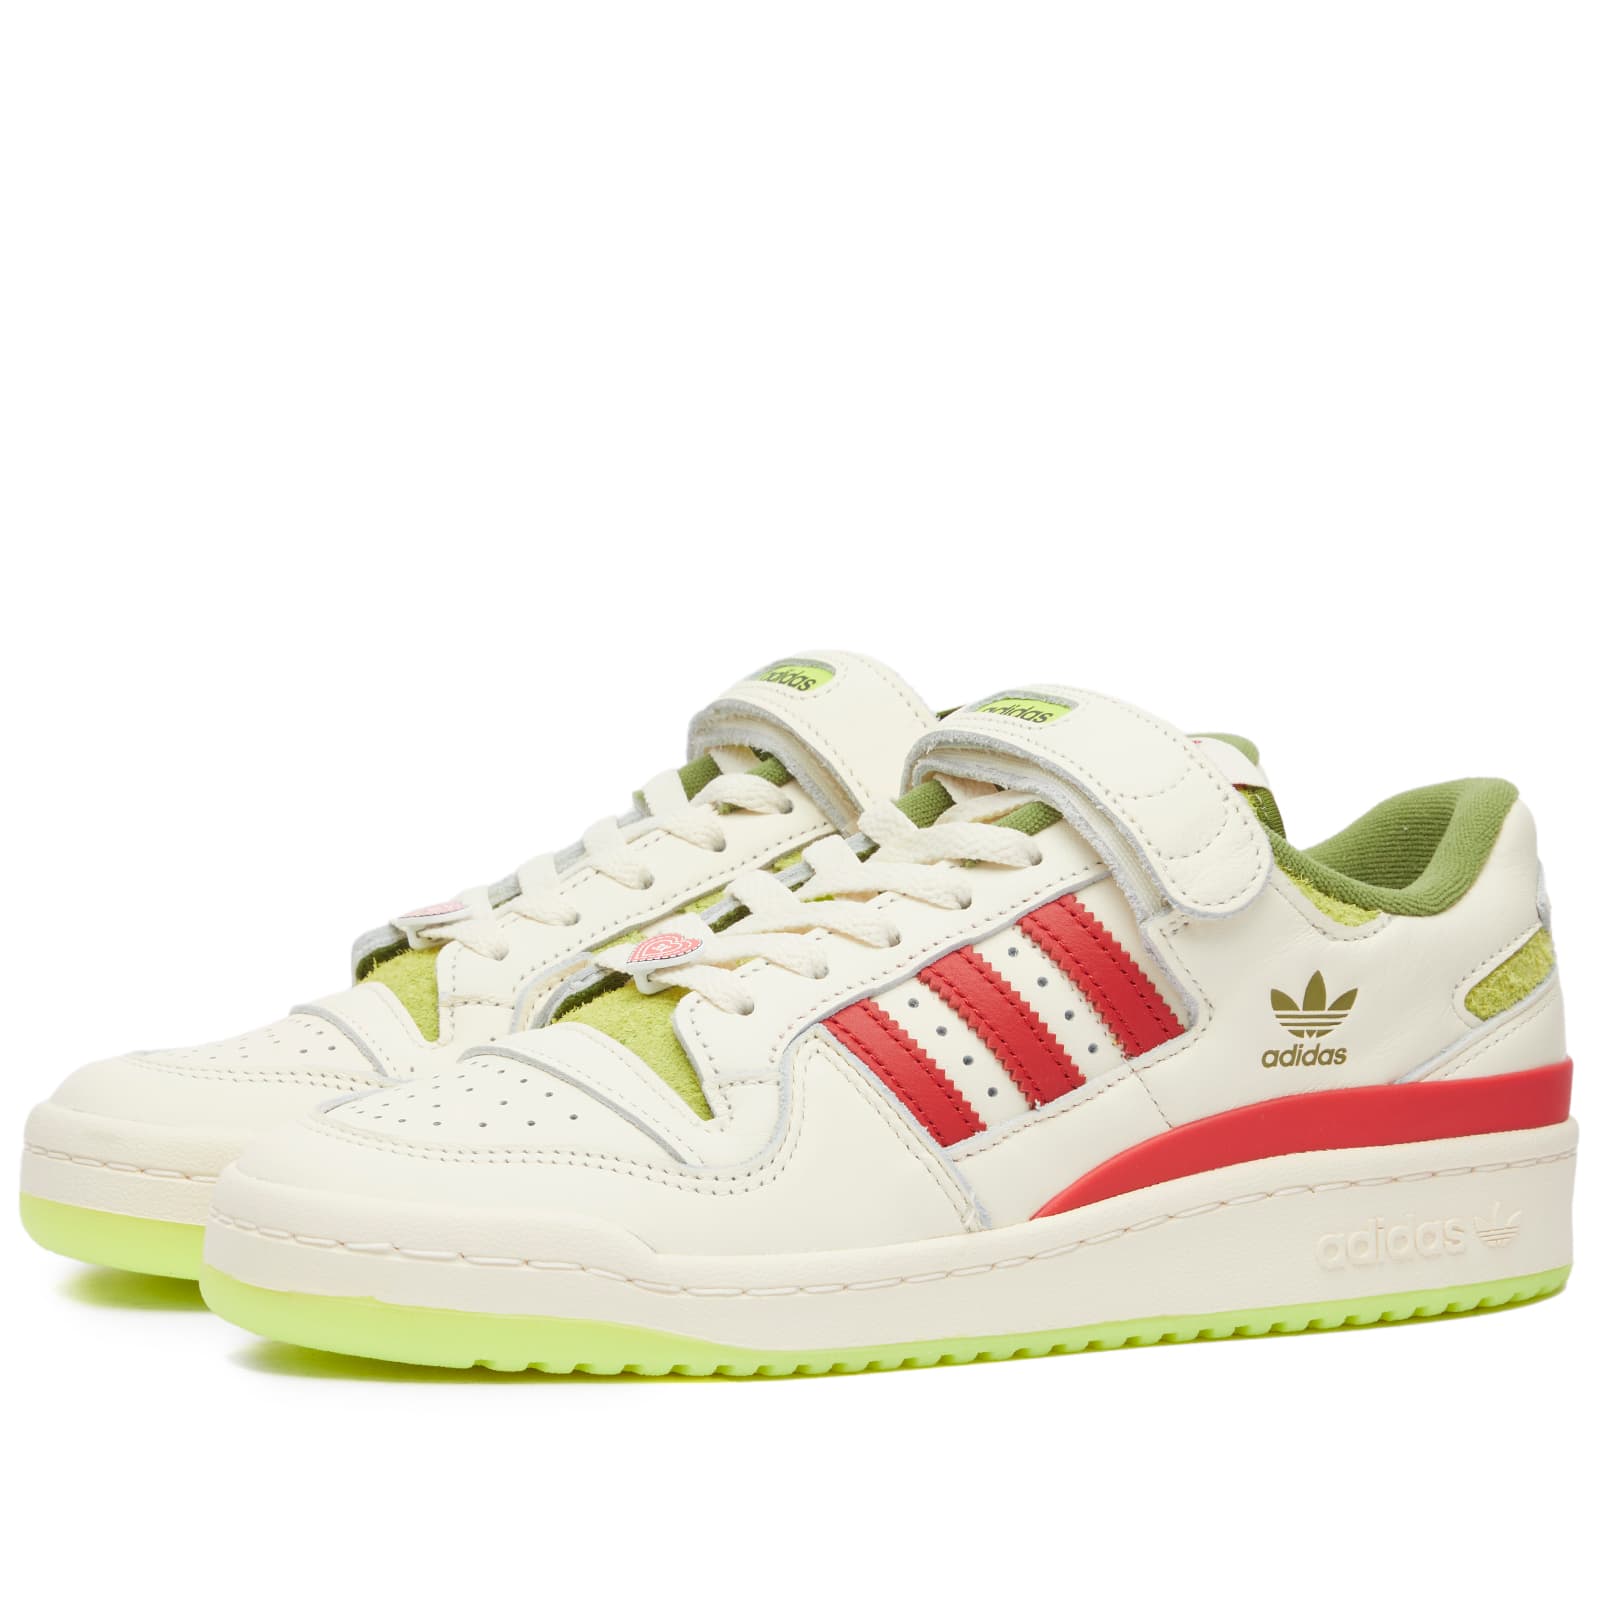 Кроссовки Adidas Forum Low 'The Grinch', цвет White, Red & Solar Slime кроссовки adidas forum low the grinch цвет white red